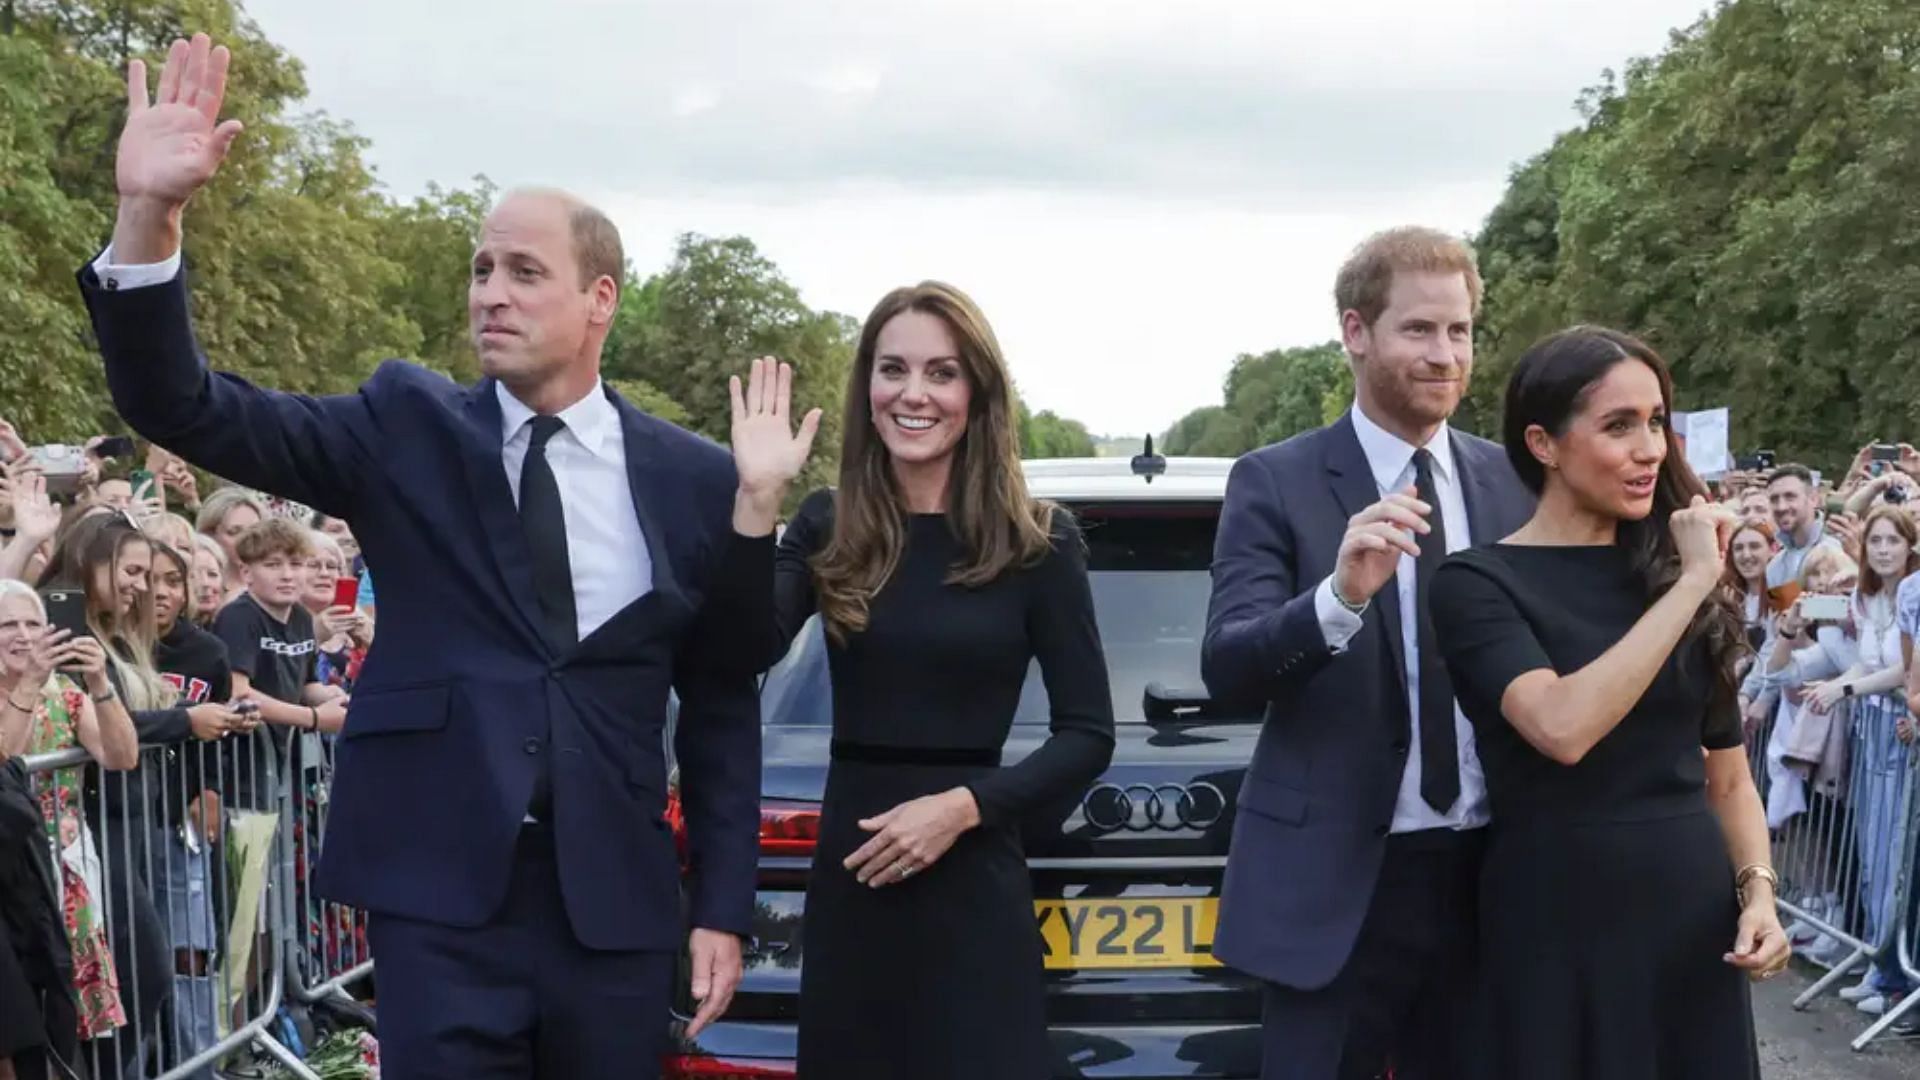 The royals outside Windsor Castle. (Image via WPA Pool/Getty Images)